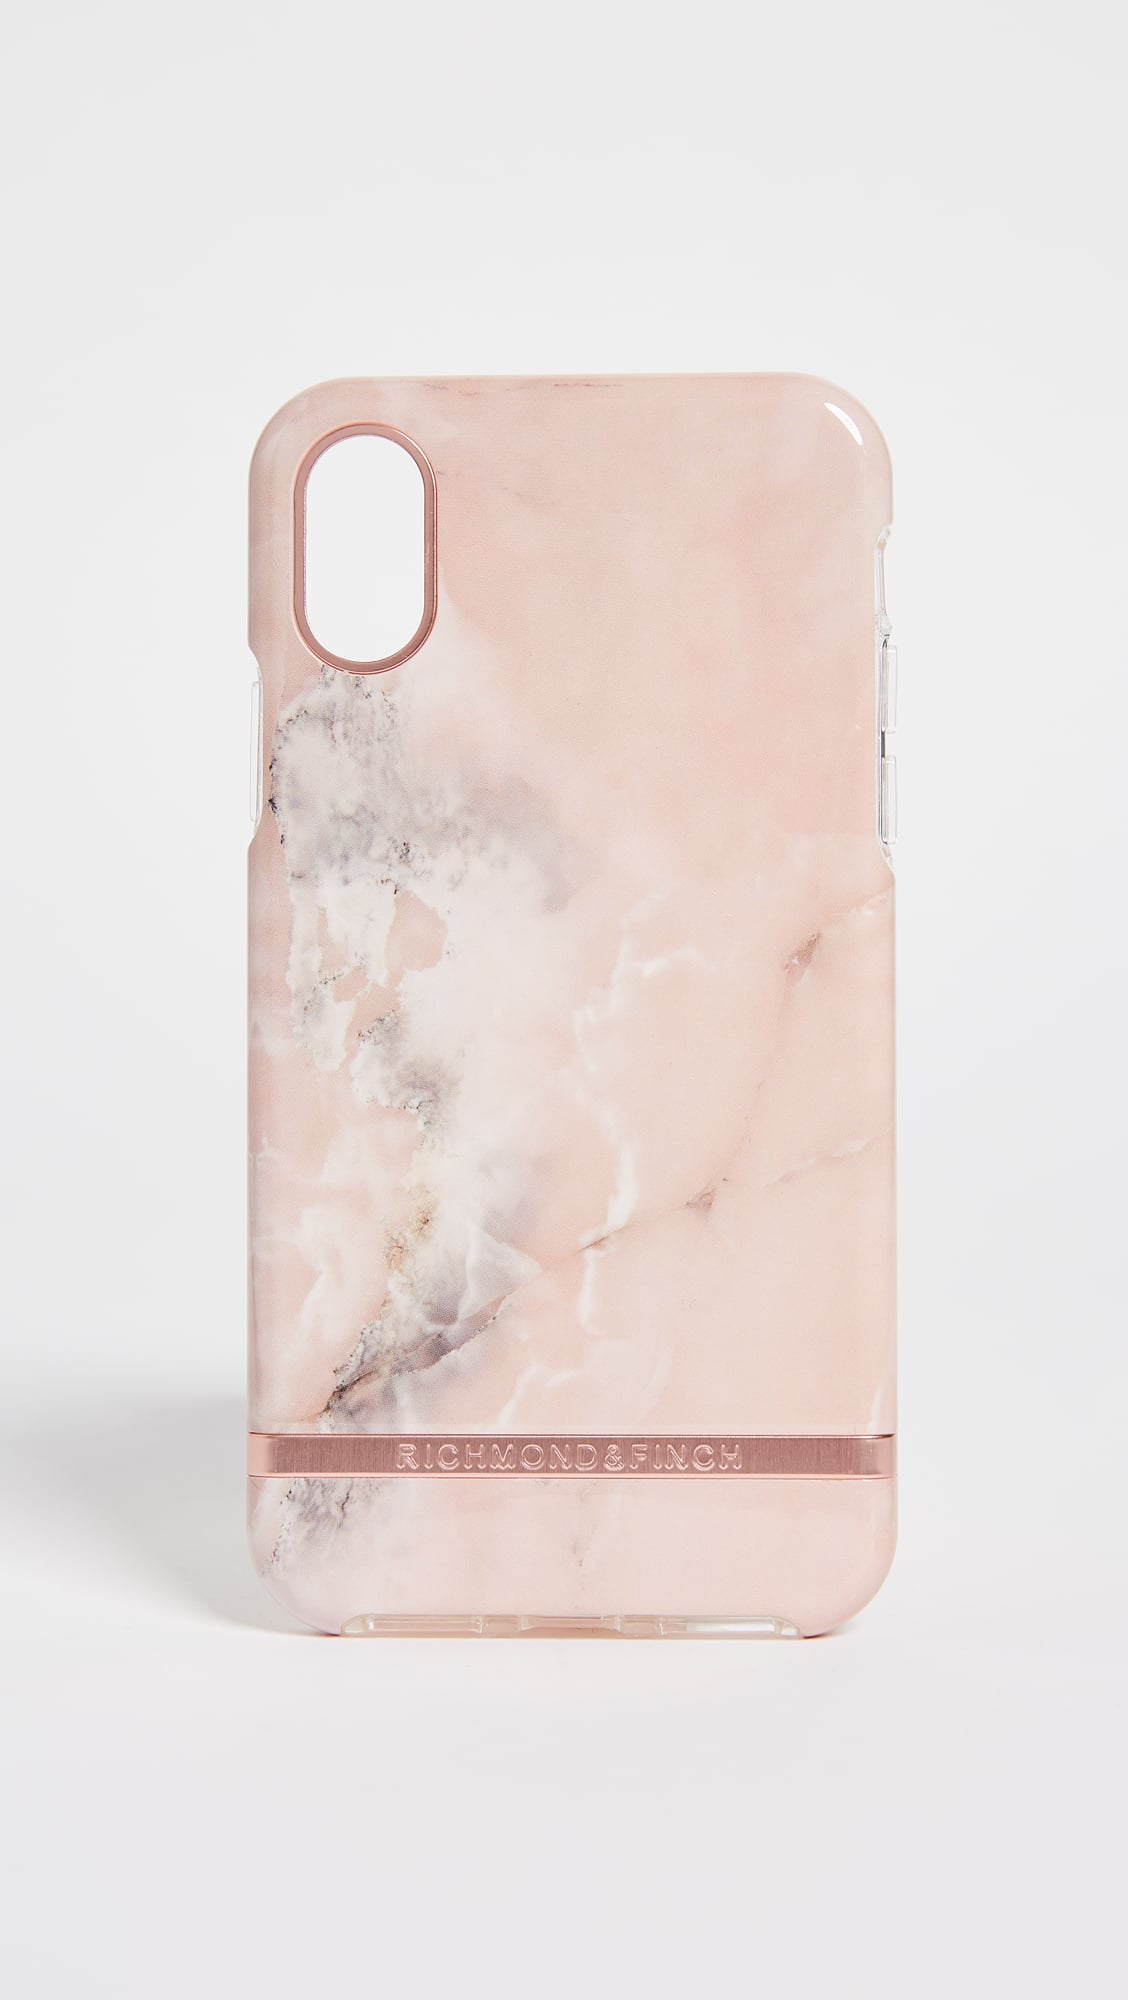 Richmond & Finch Pink Marble iPhone Case | I'll Need 25 of These Adorable iPhone Cases to Get Through the Year | POPSUGAR Tech Photo 24